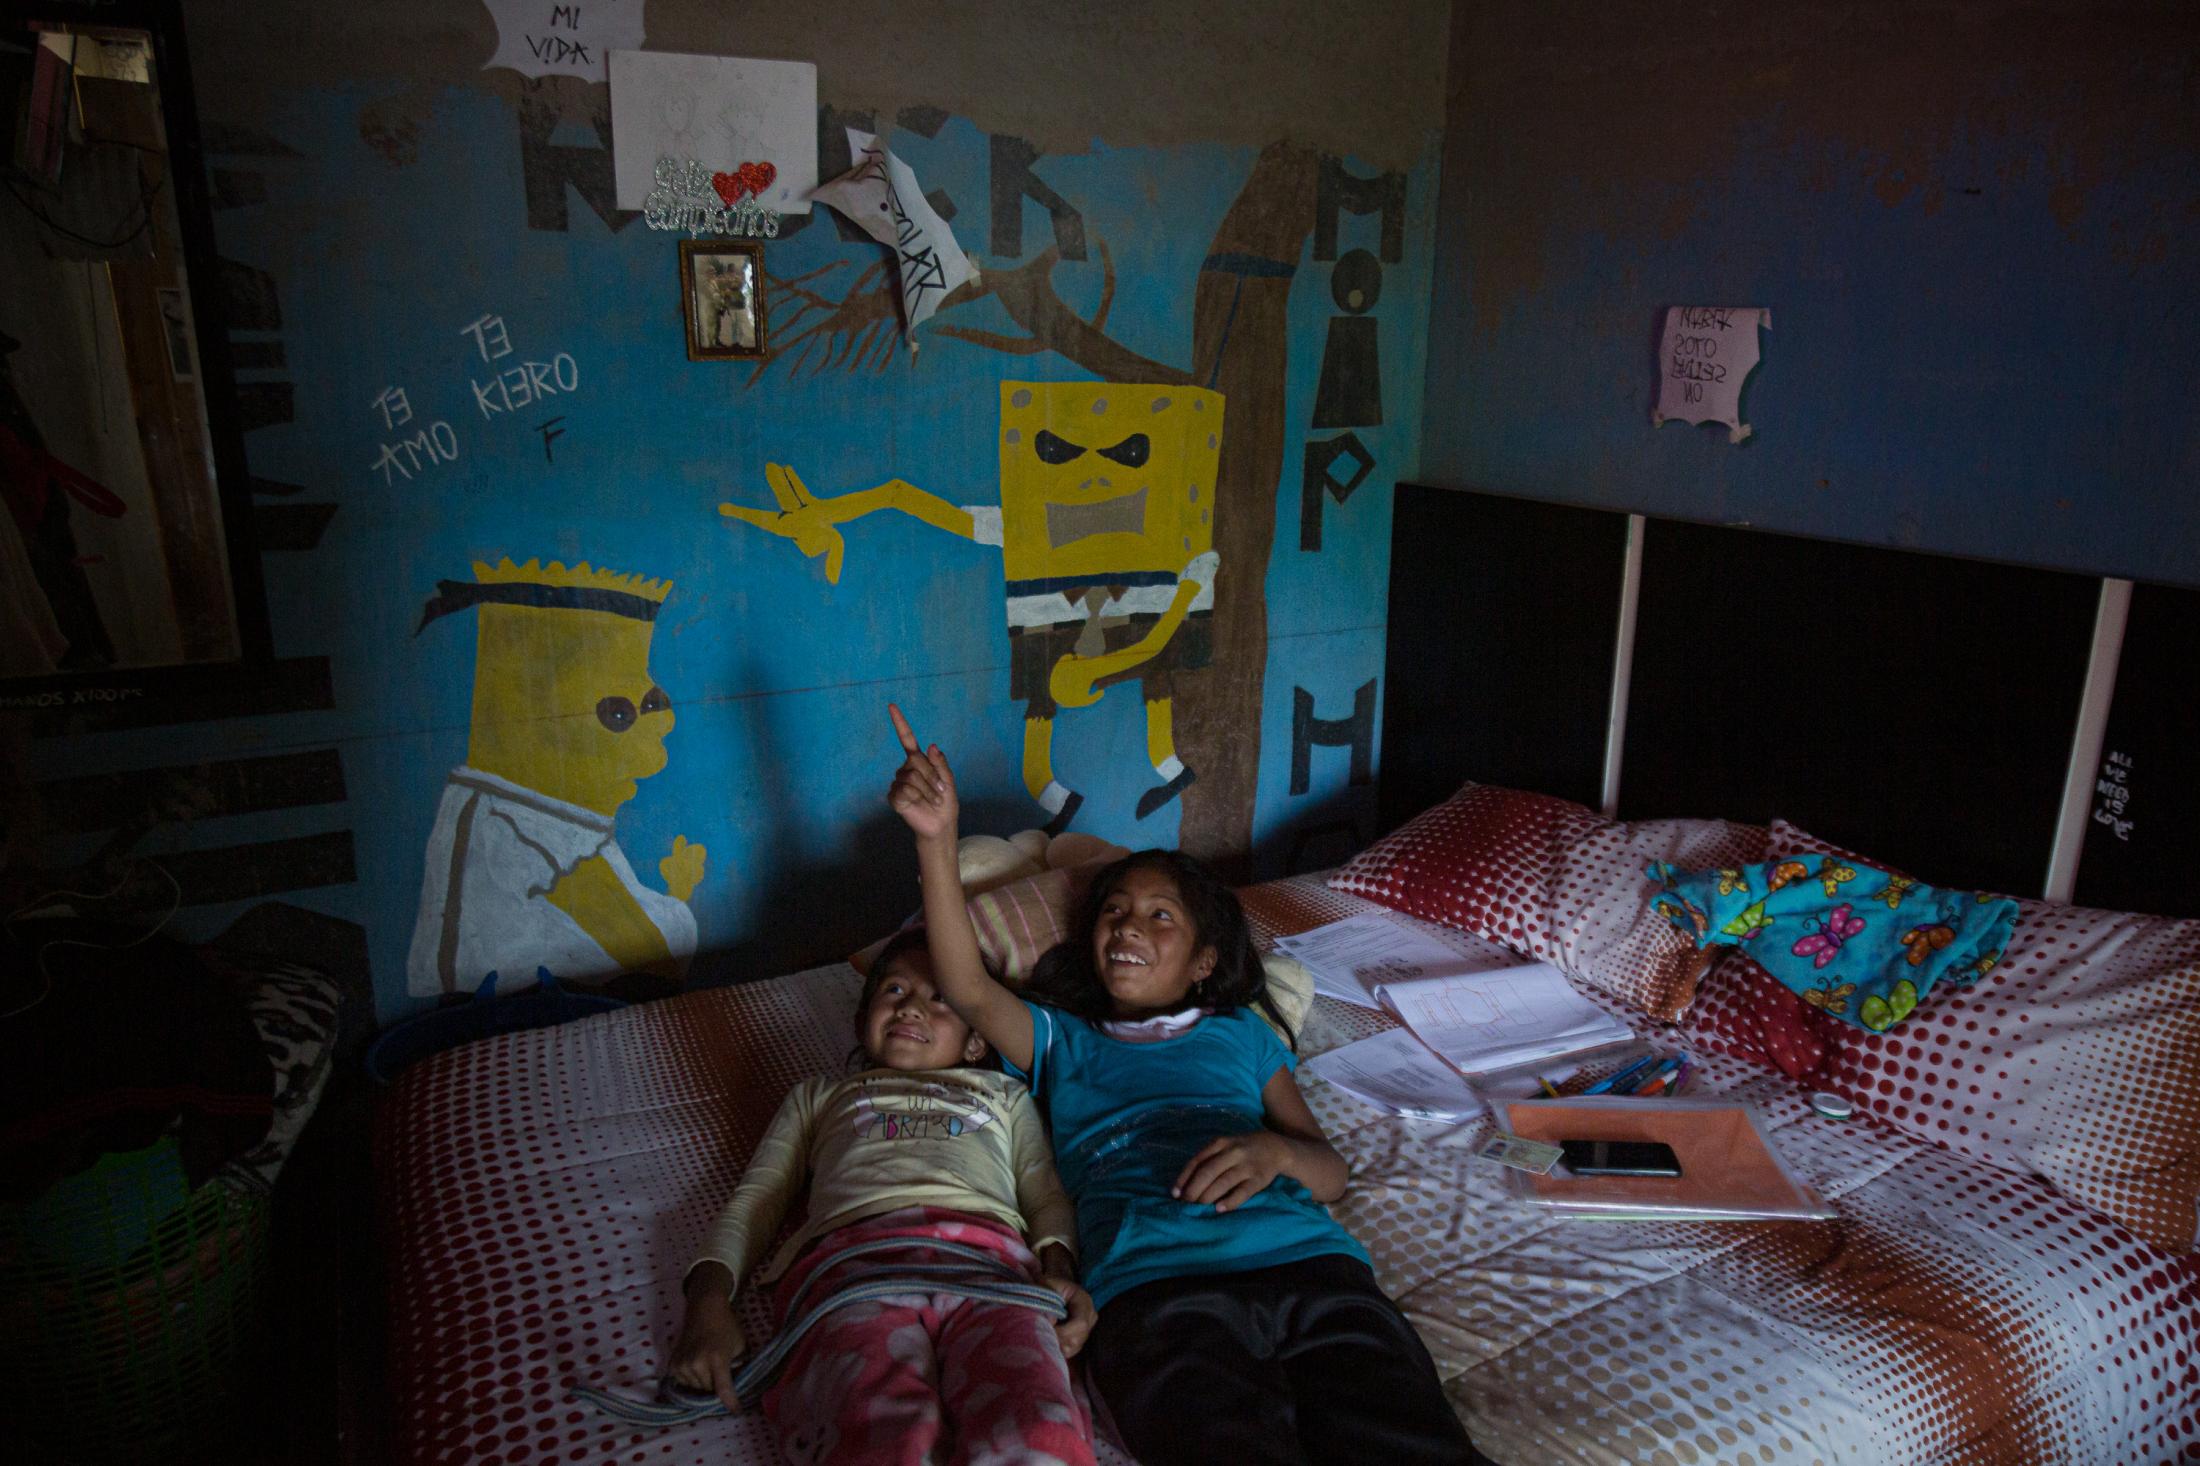 Anal&iacute; Caiza (6) accompanies her cousin, Celina Paucar (12), at her grandmother&#39;s house after she does her homework. They watch TV and play in their aunt and uncle&#39;s room when Celina finishes the homework that her school sends her through Whatsapp, on the afternoon of May 22, 2020. Cotogchoa-Ecuador. Andr&eacute;s Y&eacute;pez. 